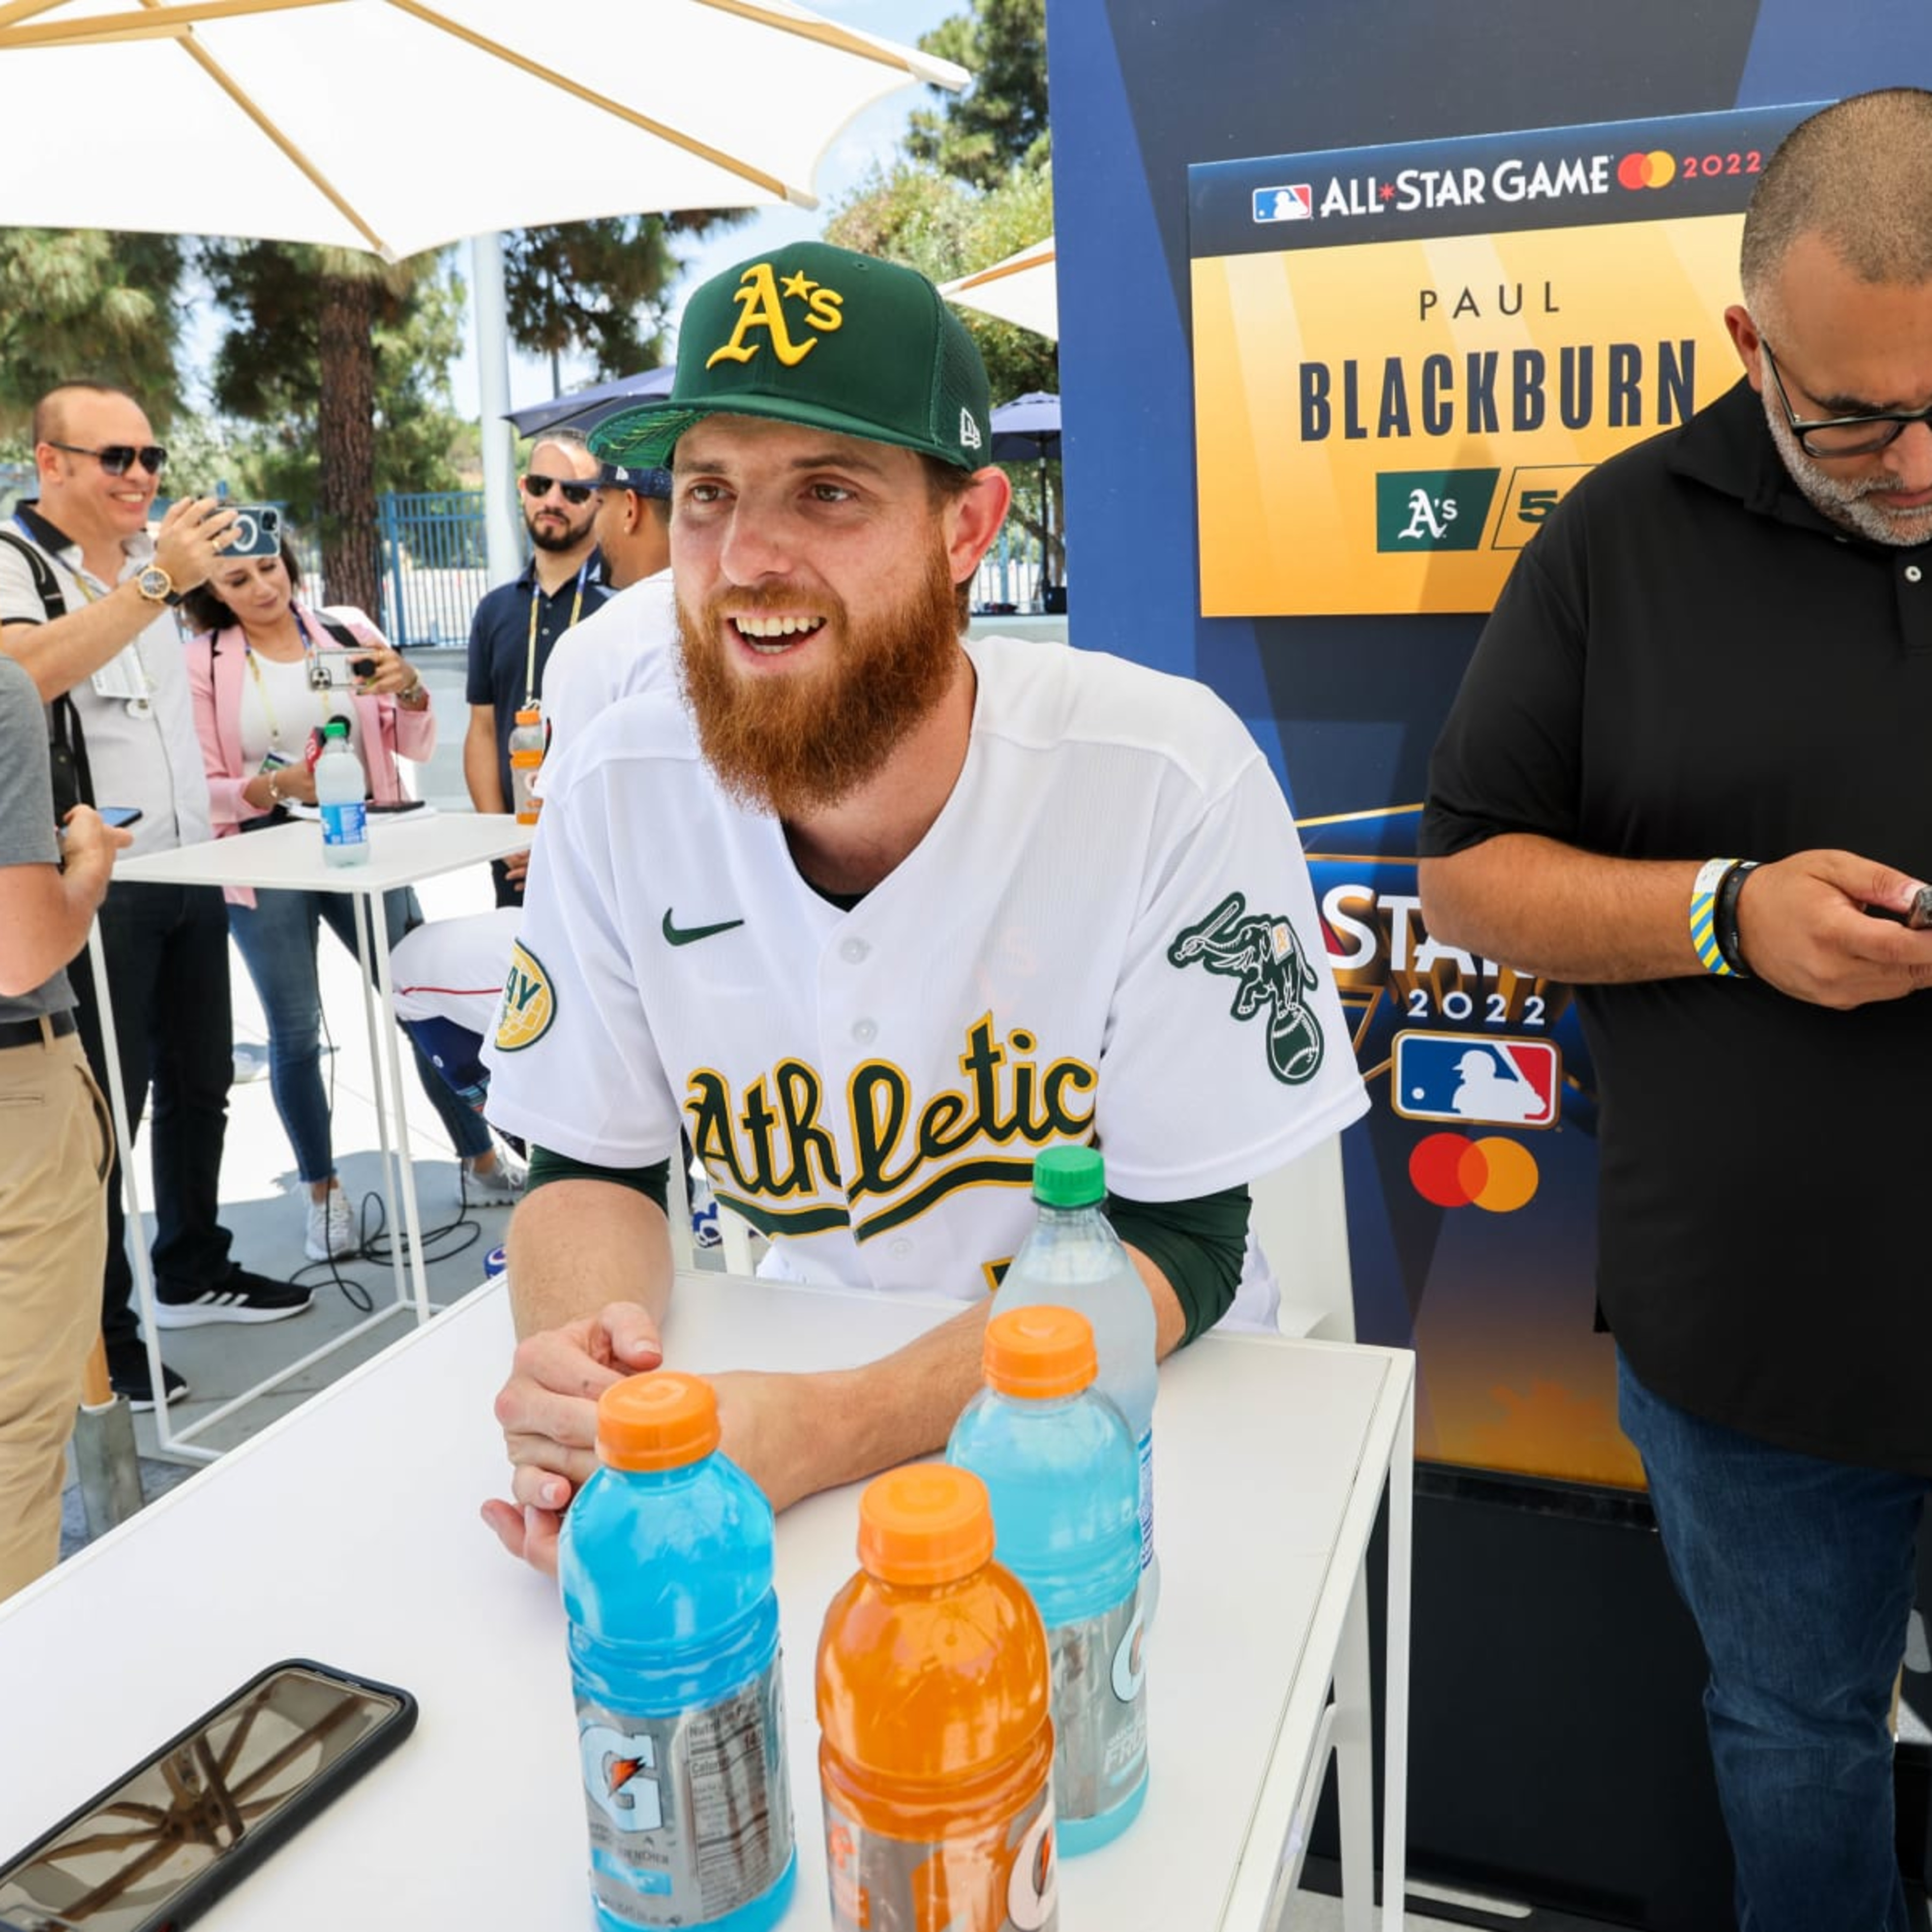 A’s SP Paul Blackburn Caught Ride on Astros’ Charter Plane to 2022 MLB All-Star Game